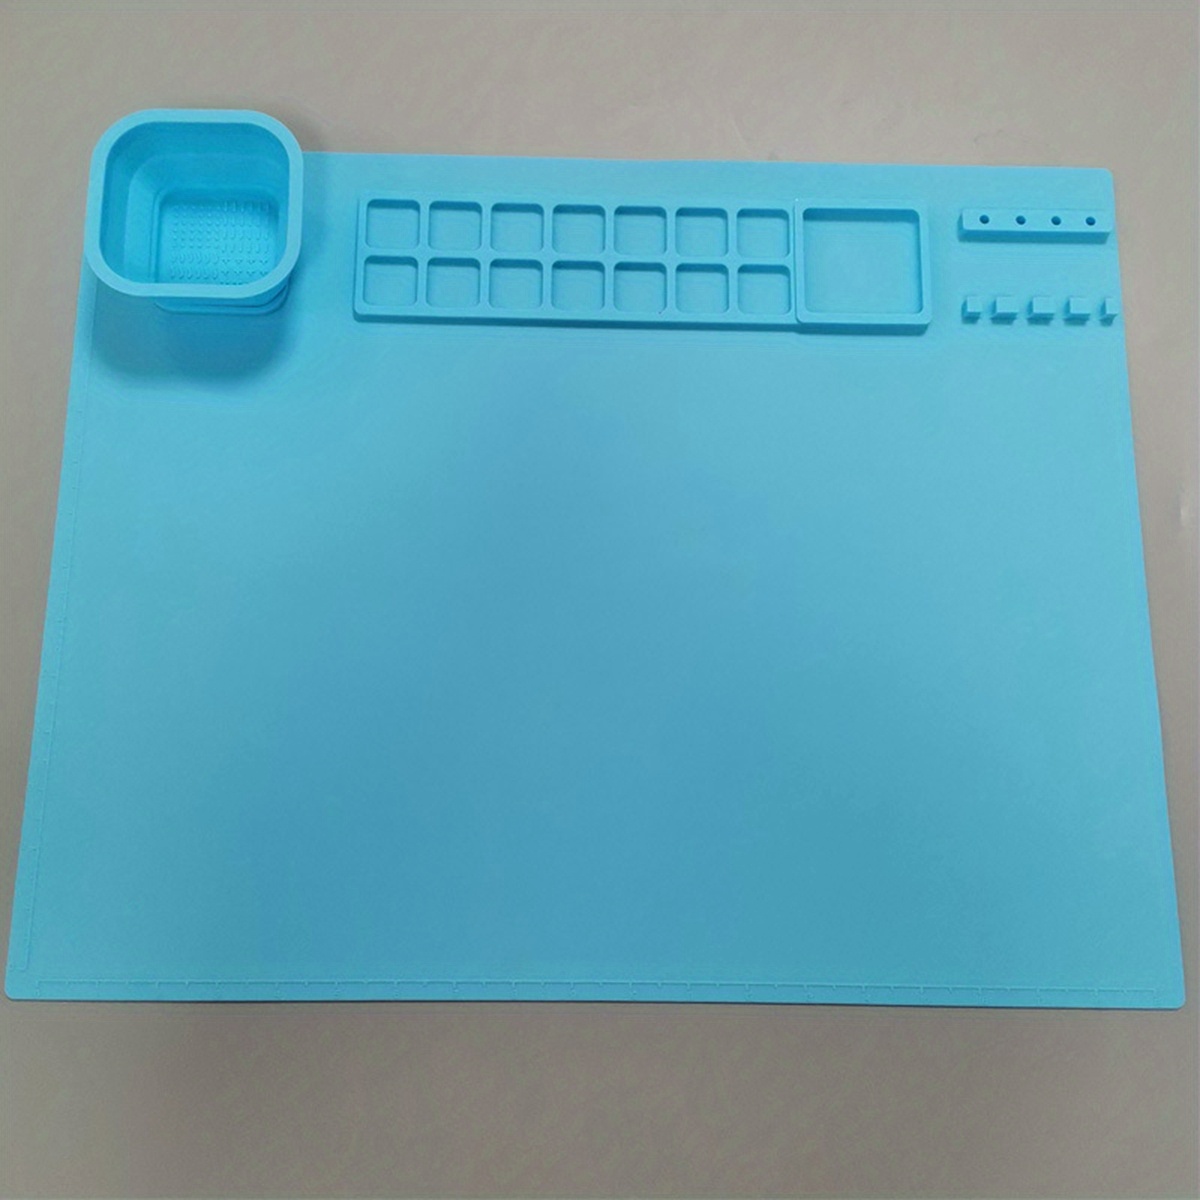  Silicone Painting Mat - 19.7X15.7 Silicone Art Mat